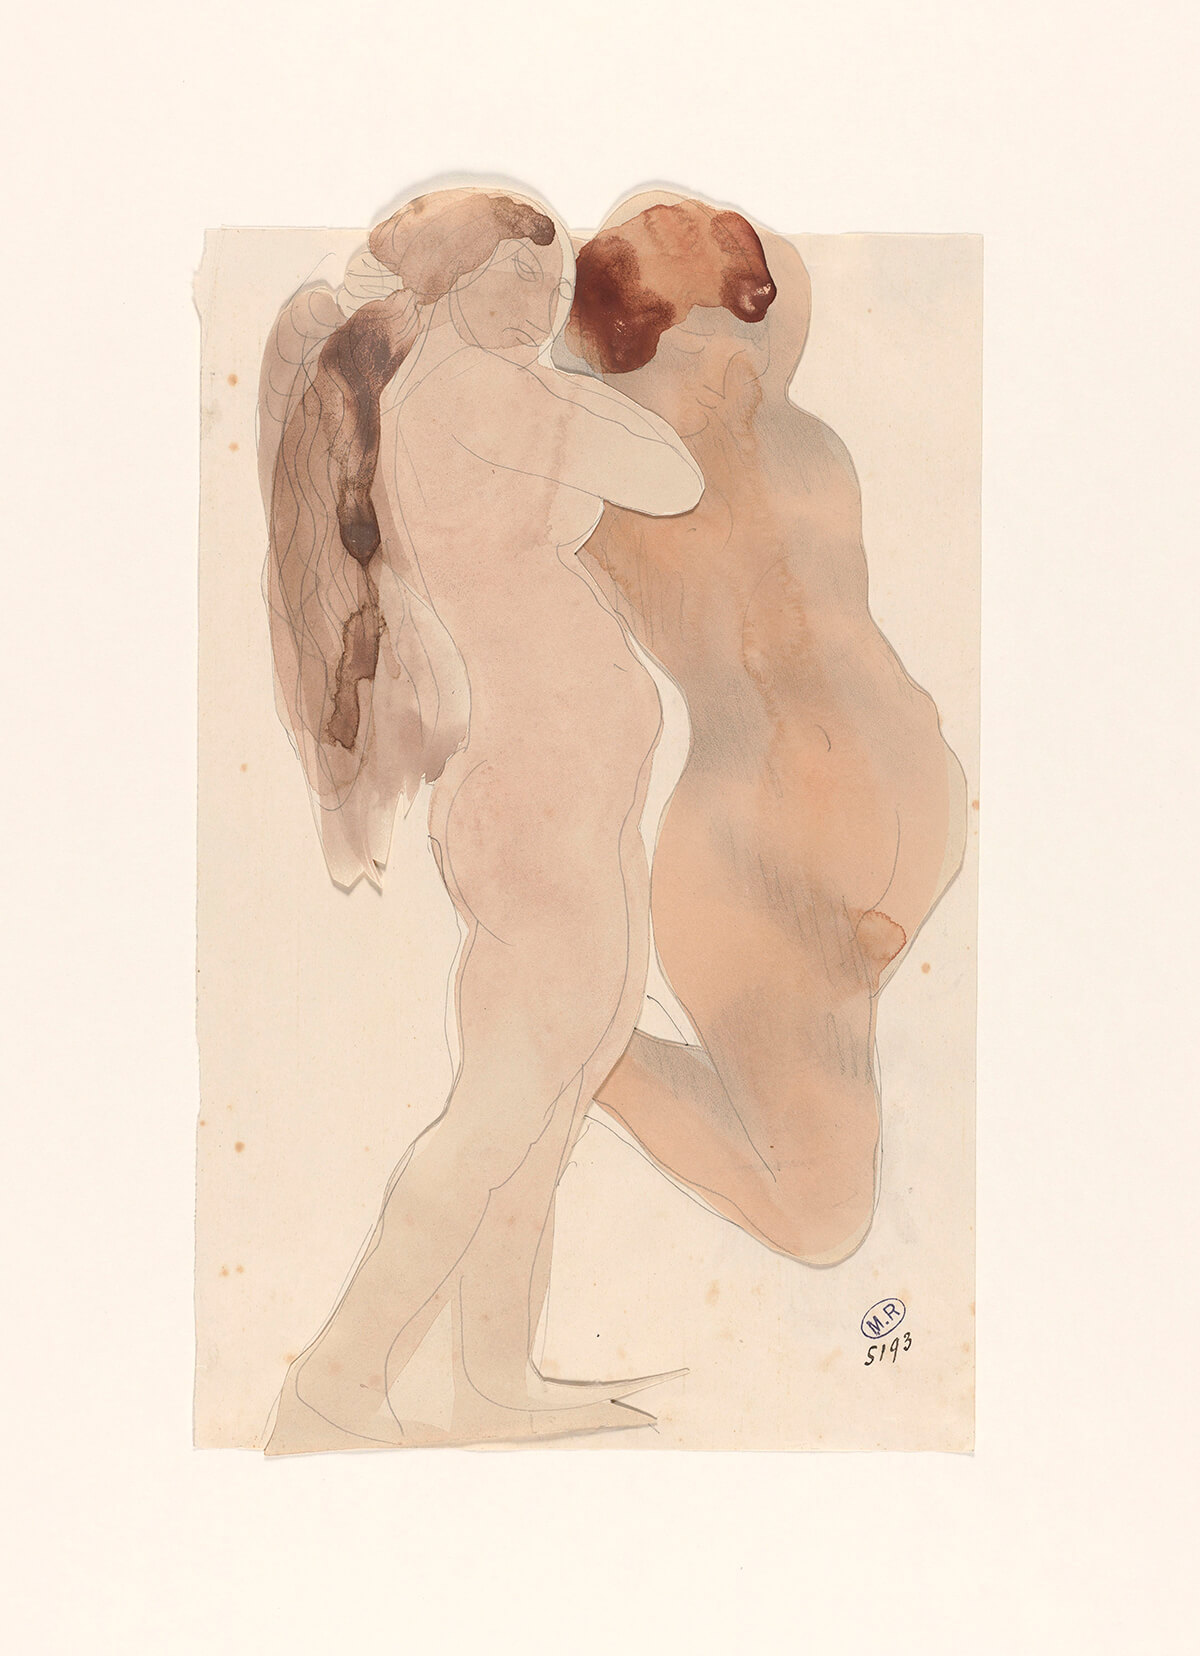 Drawing of two female nude figures by French sculptor Rodin